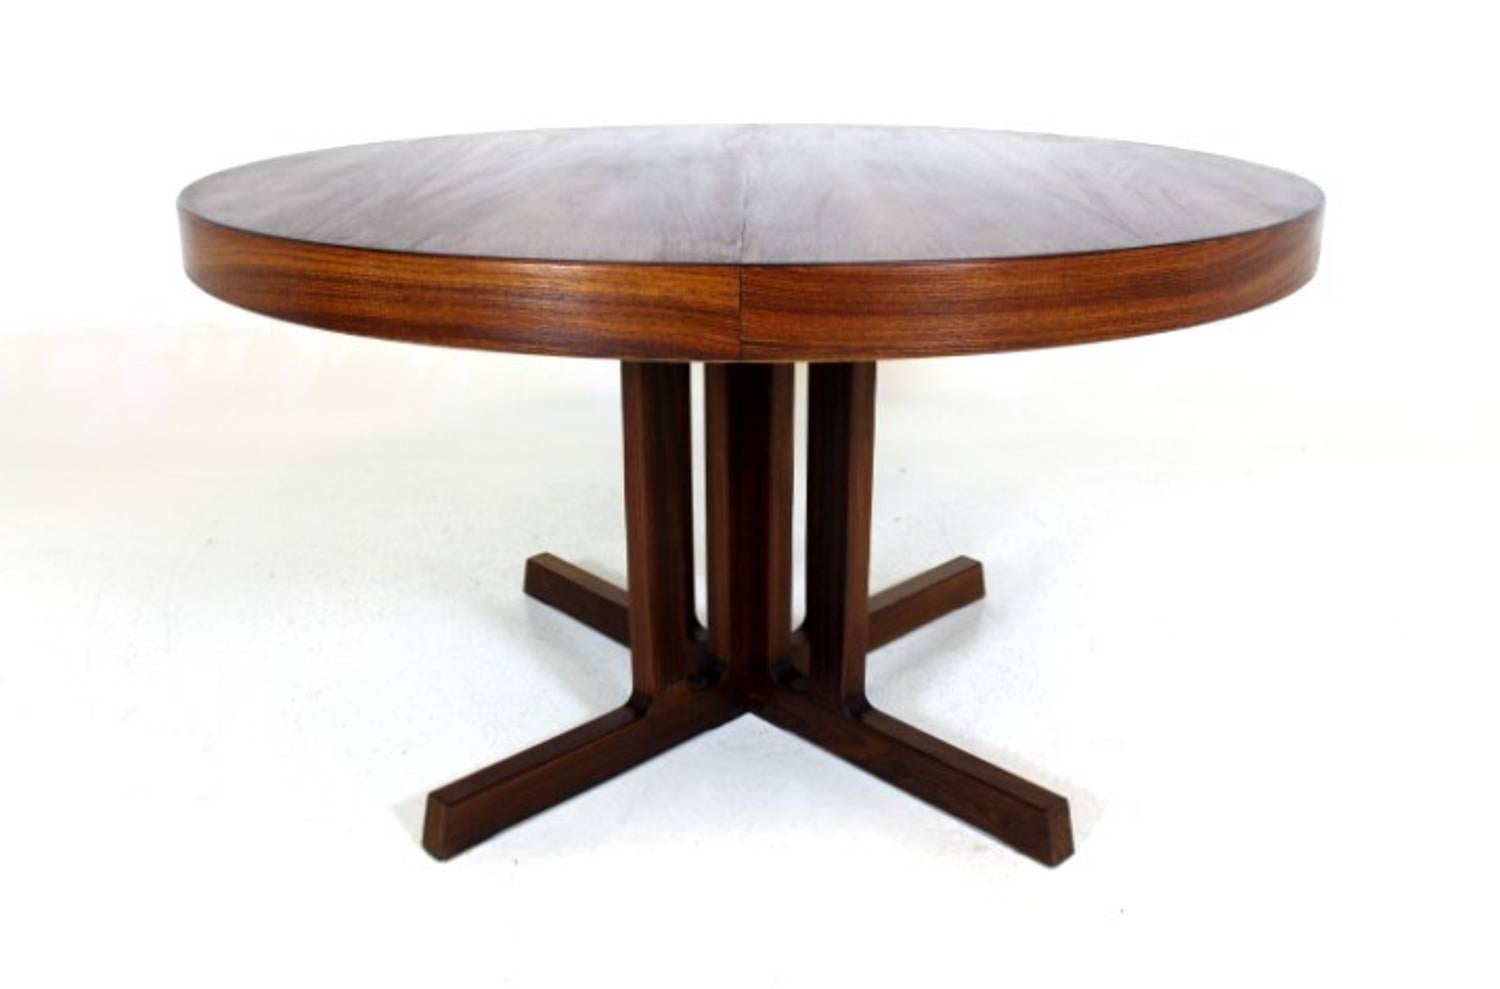 Rare Danish modern rosewood expandable pedestal table. Attributed to the Danish designer Kai Kristiansen The grain on top of the table is stunning and matched in the extensions. When the table is fully extended, oval, W 188 cm, D 128 cm, H 74 cm.